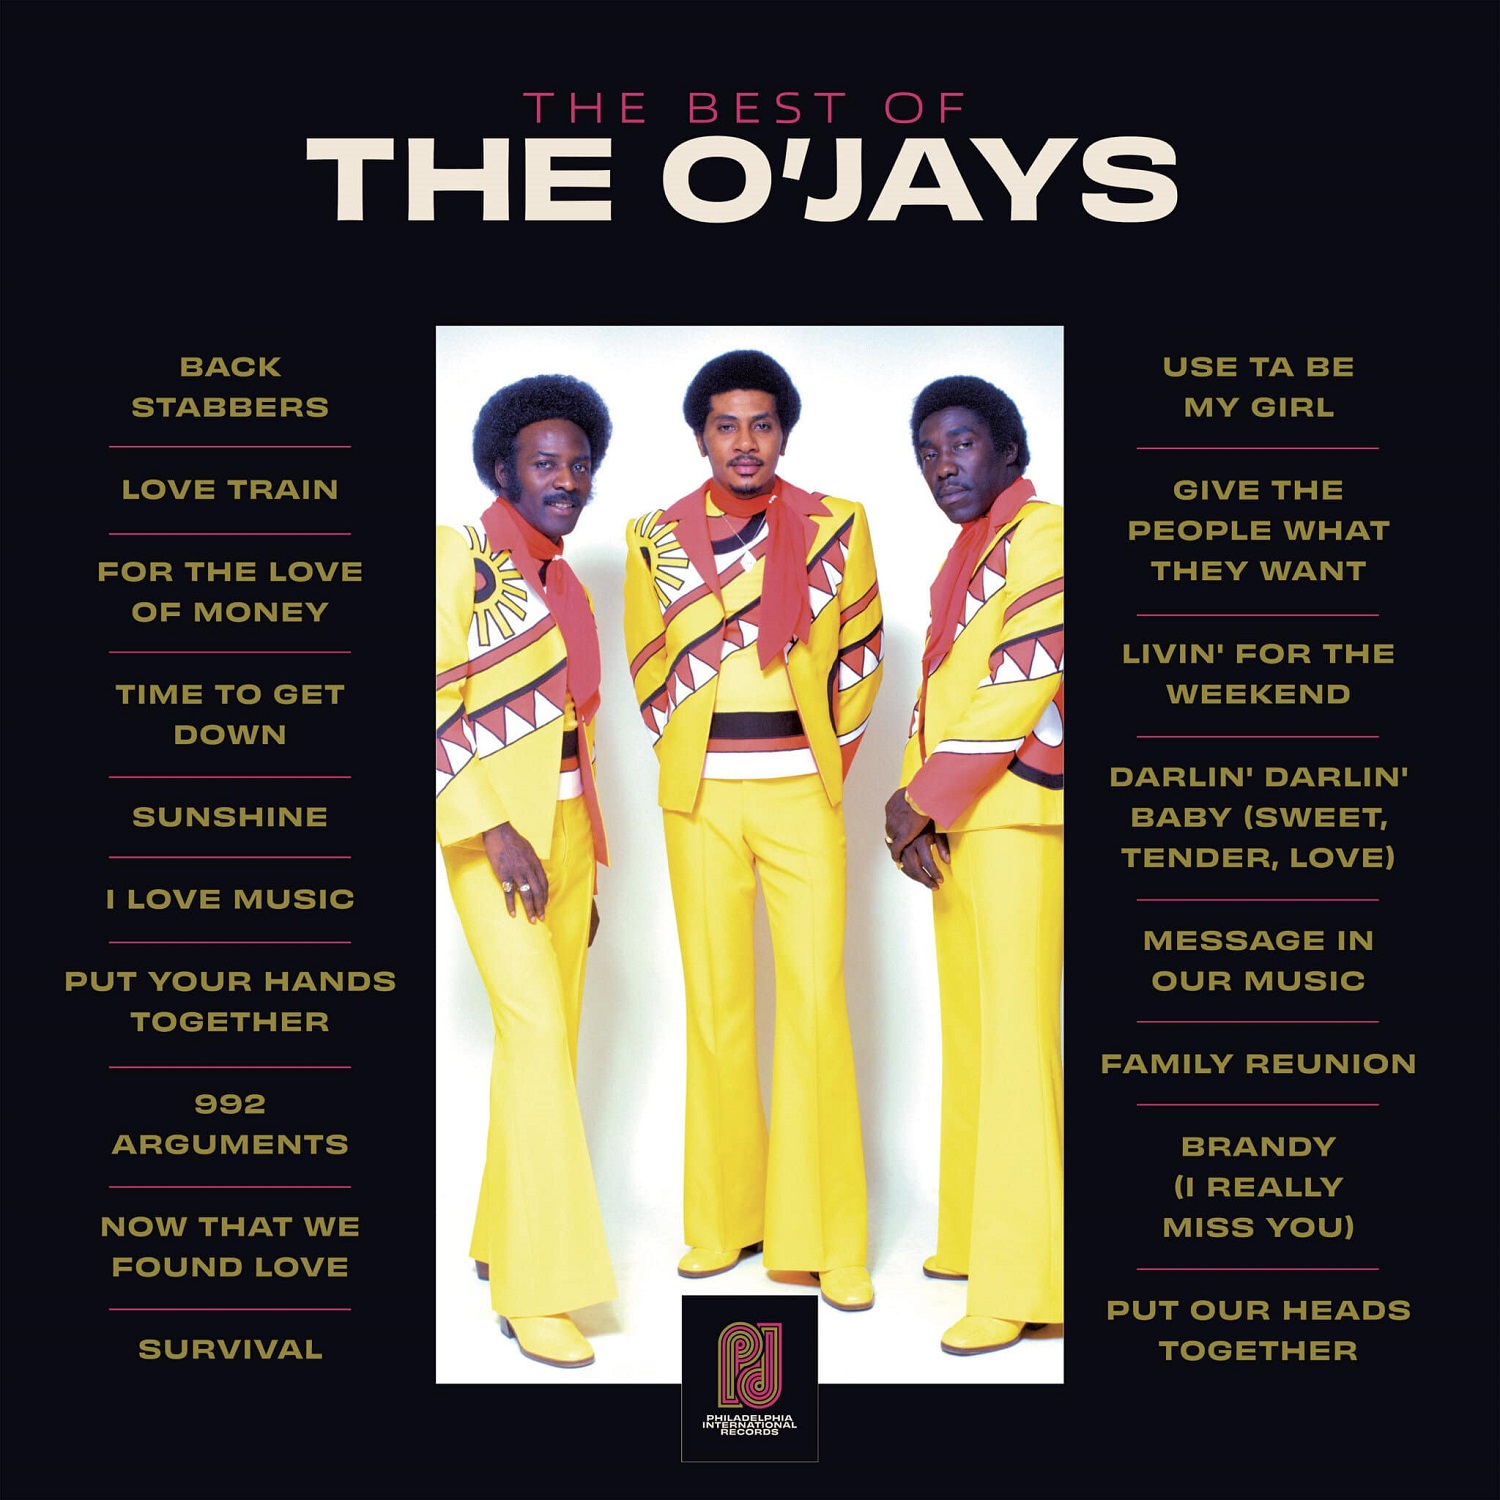 Рок-н-ролл Sony The O’Jays - Best of The O’Jays (Black Vinyl) ray charles the very best of ray charles what d i say coloured vinyl lp